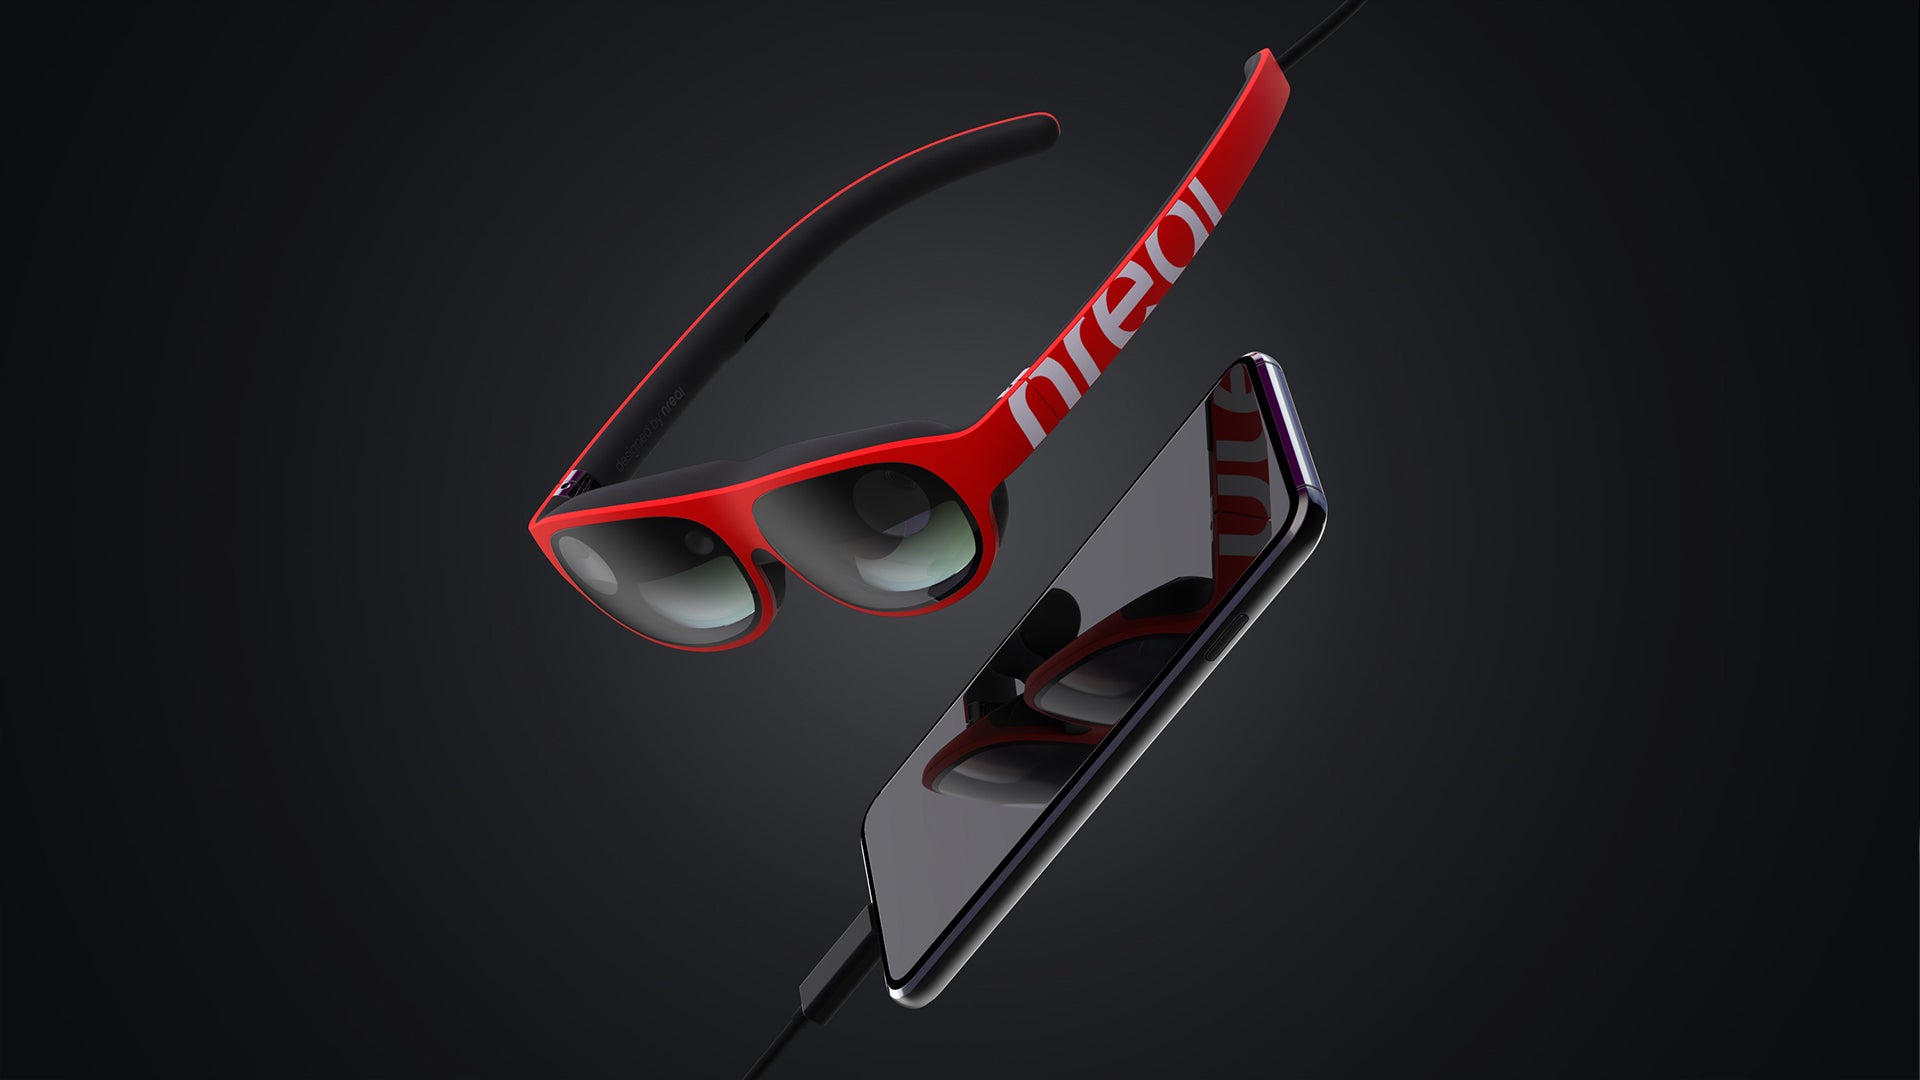 The Nreal Air glasses here may be far from mainstream, but when Apple and Samsung release something like this&nbsp;&ndash; prepare for a cultural shift - These 3 massive smartphone and tablet breakthroughs didn't happen in 2022, but likely will in 2023!